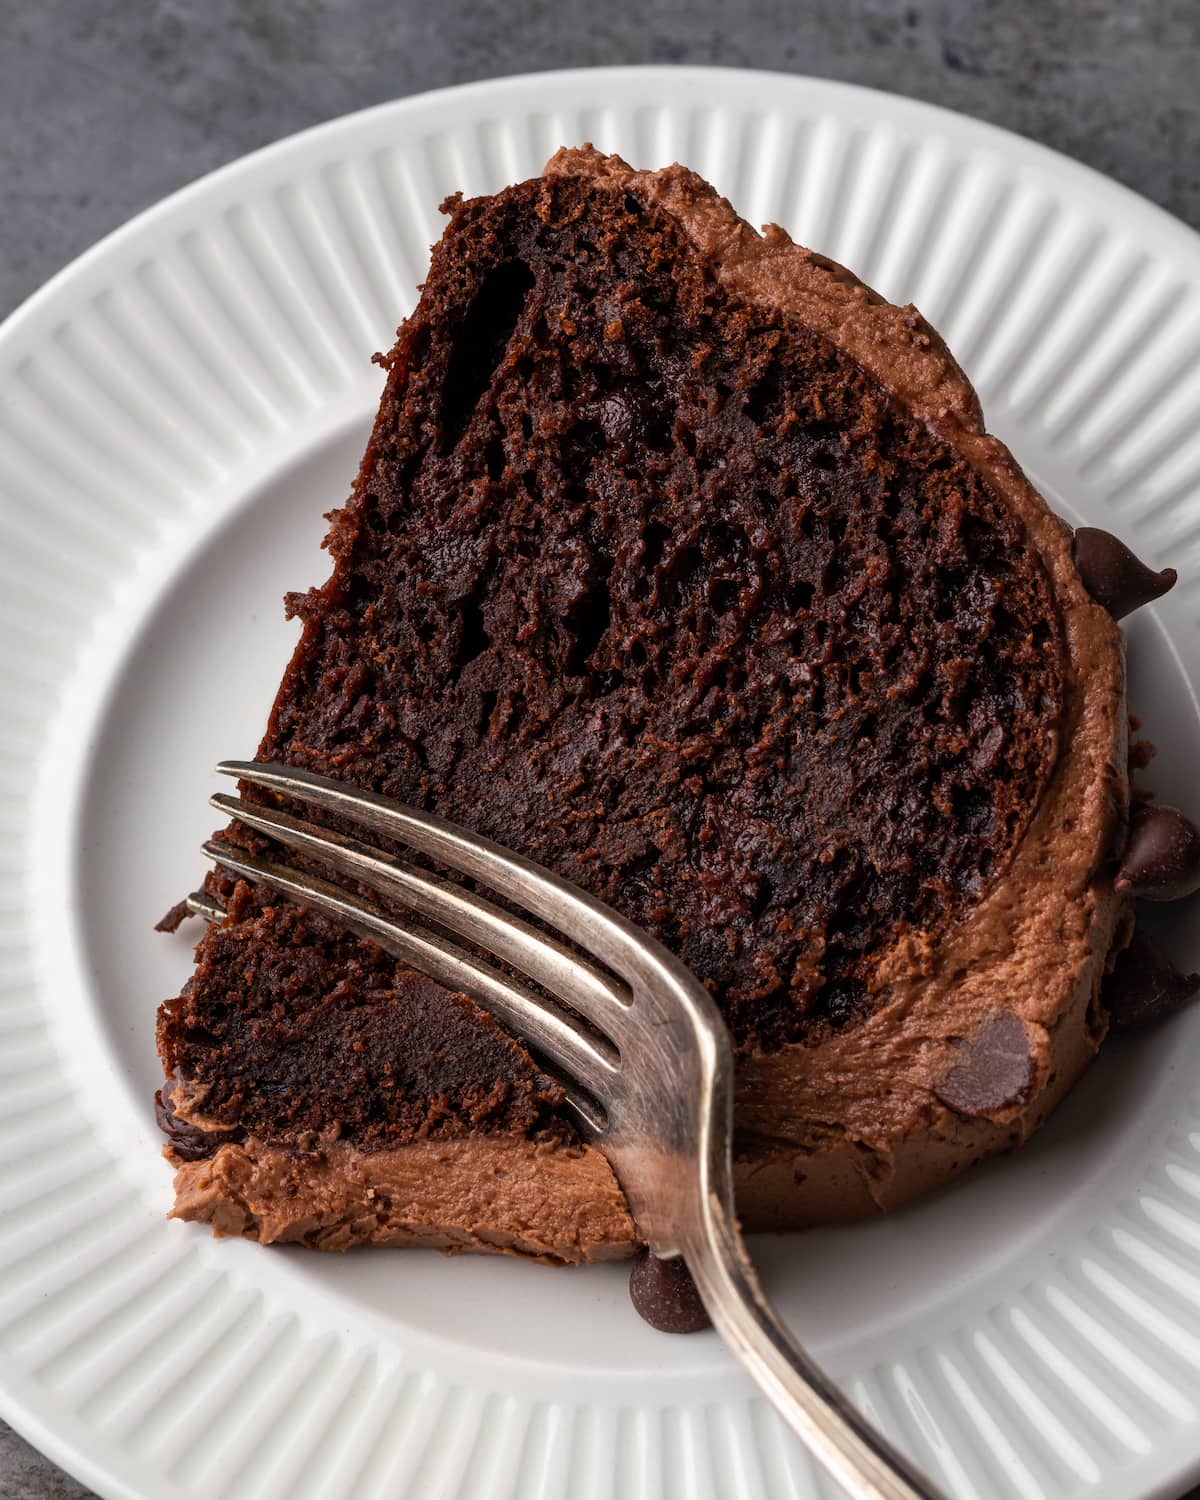 A fork cutting into a slice of ridiculous chocolate cake on a white plate.